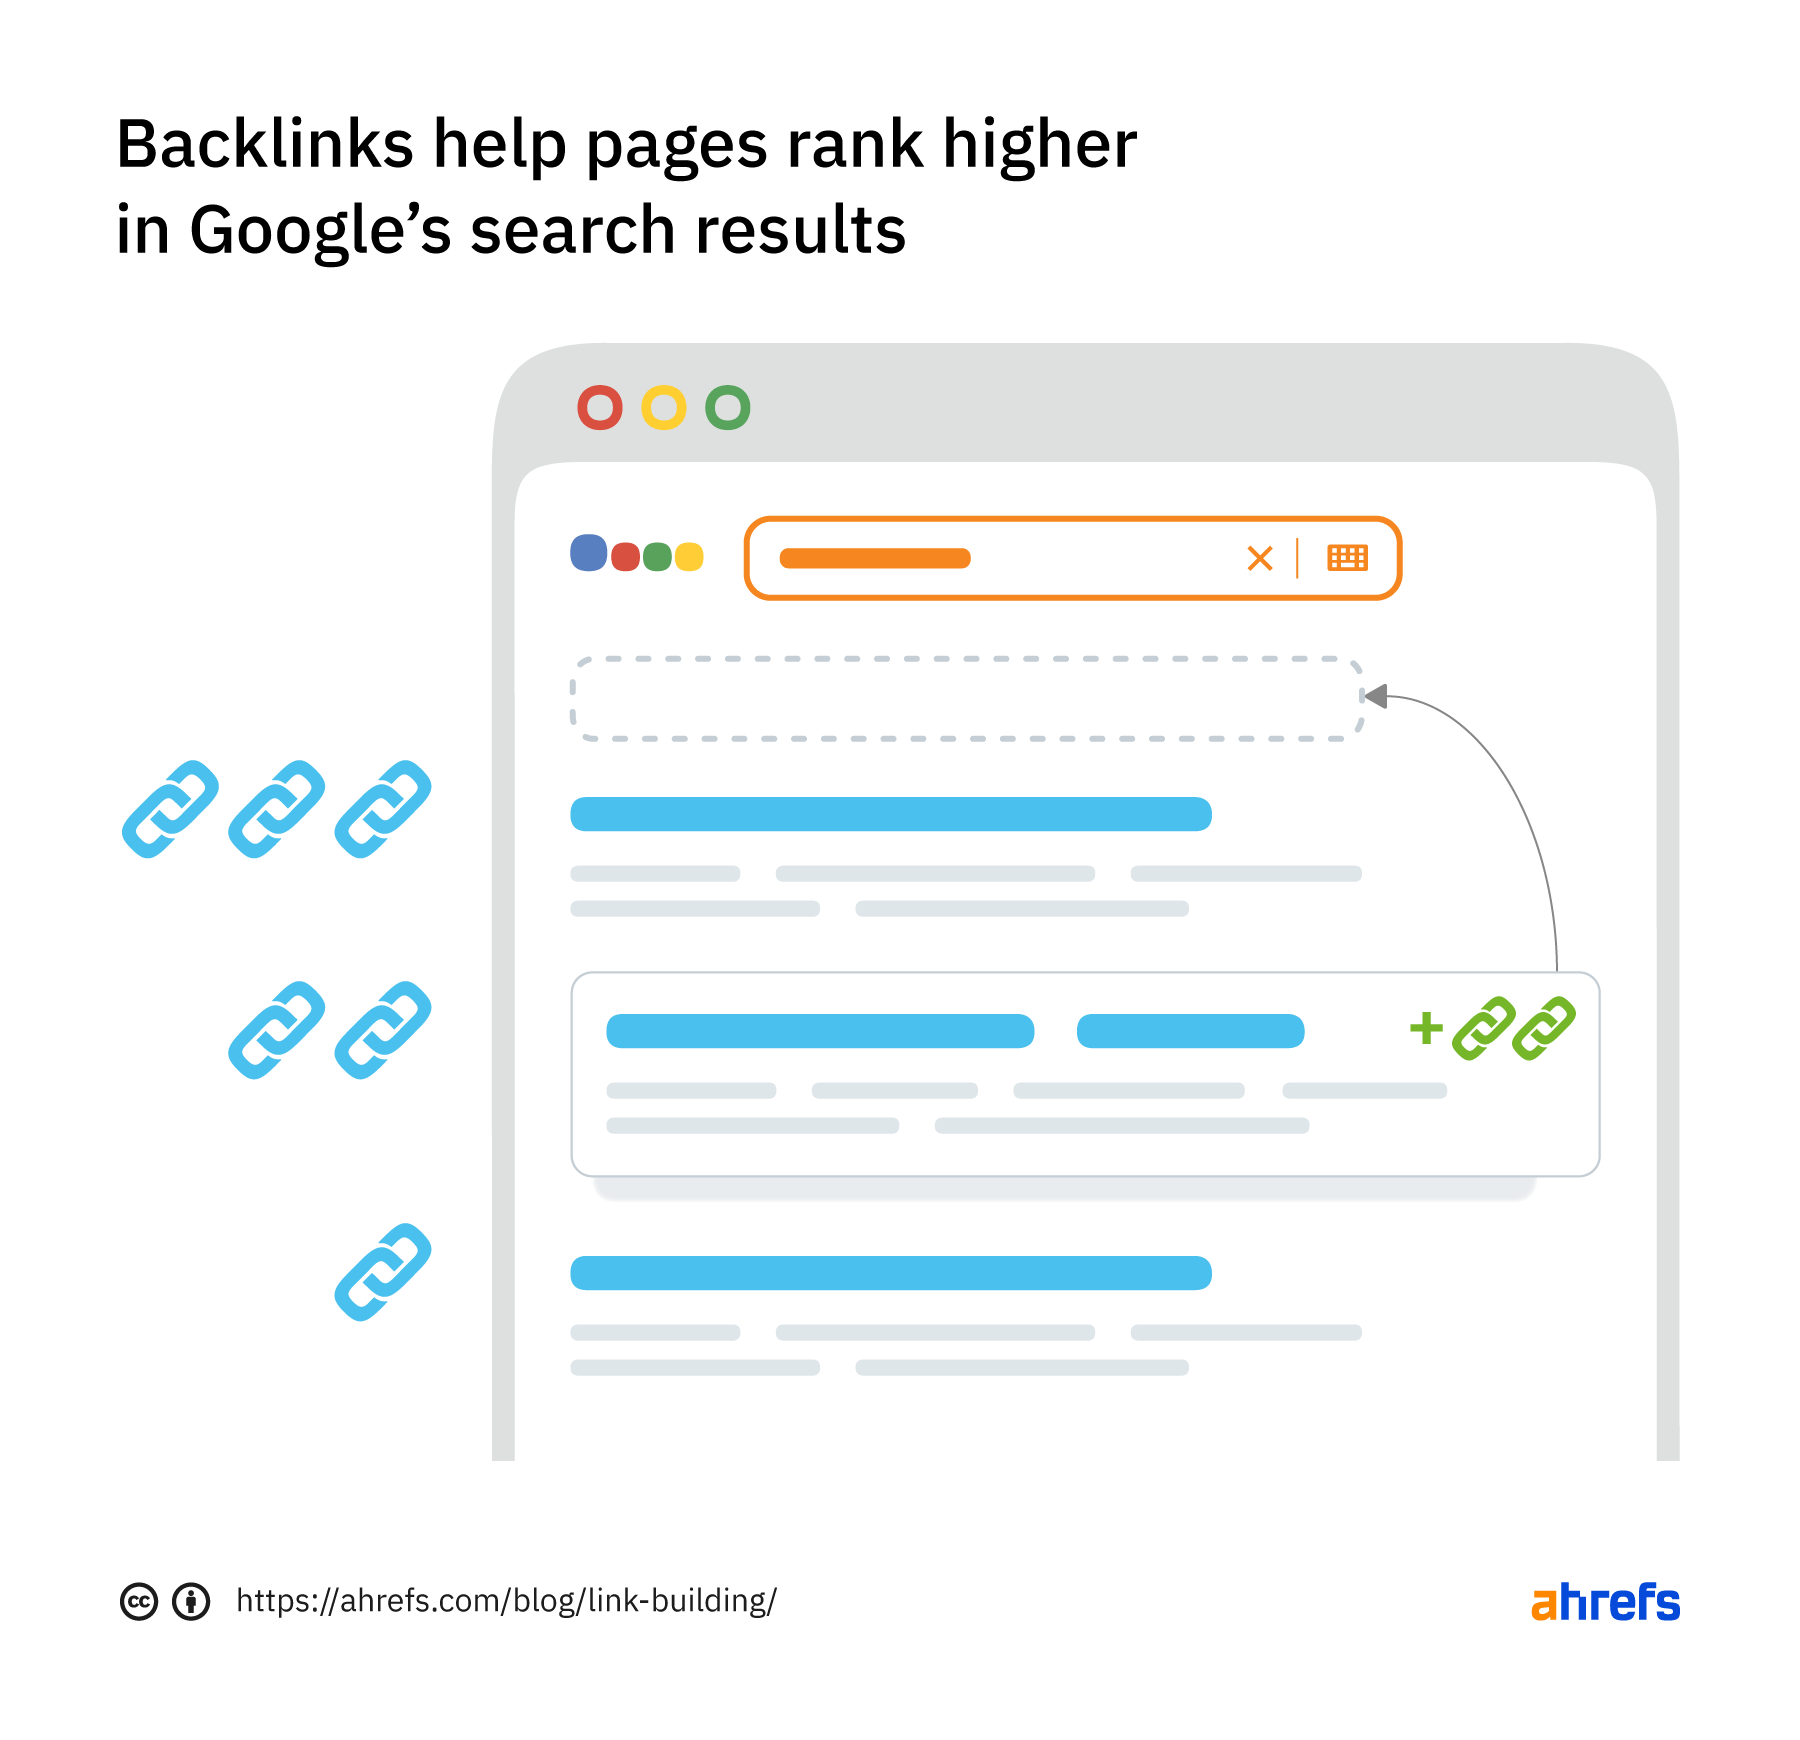 Backlinks help pages rank higher in Google's search results